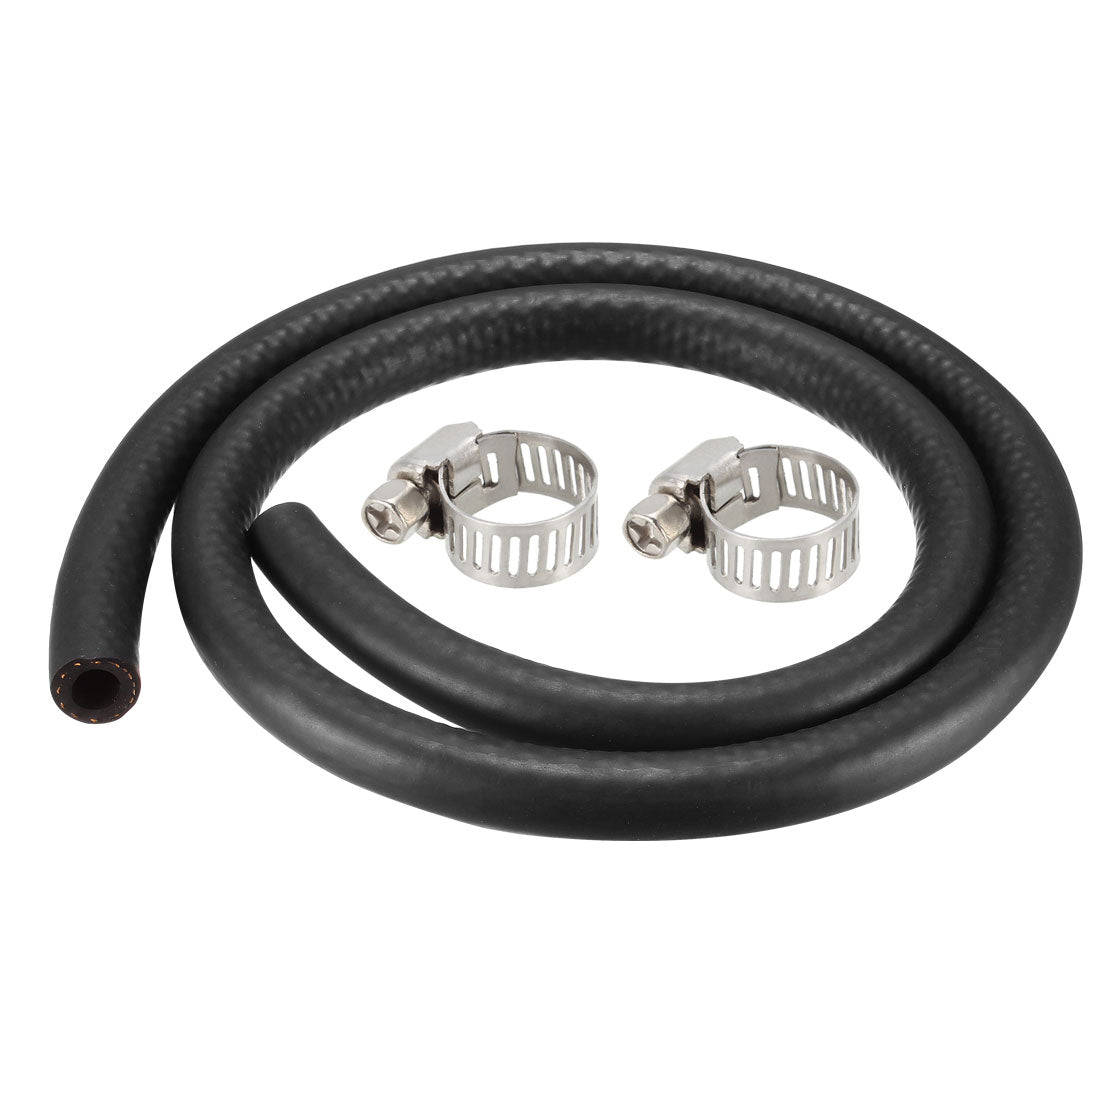 uxcell Uxcell Fuel Line Fuel Hose Rubber  8mm I.D.  0.9M/2.95FT  Diesel Petrol Hose Engine Pipe Tubing with 2 Clamps